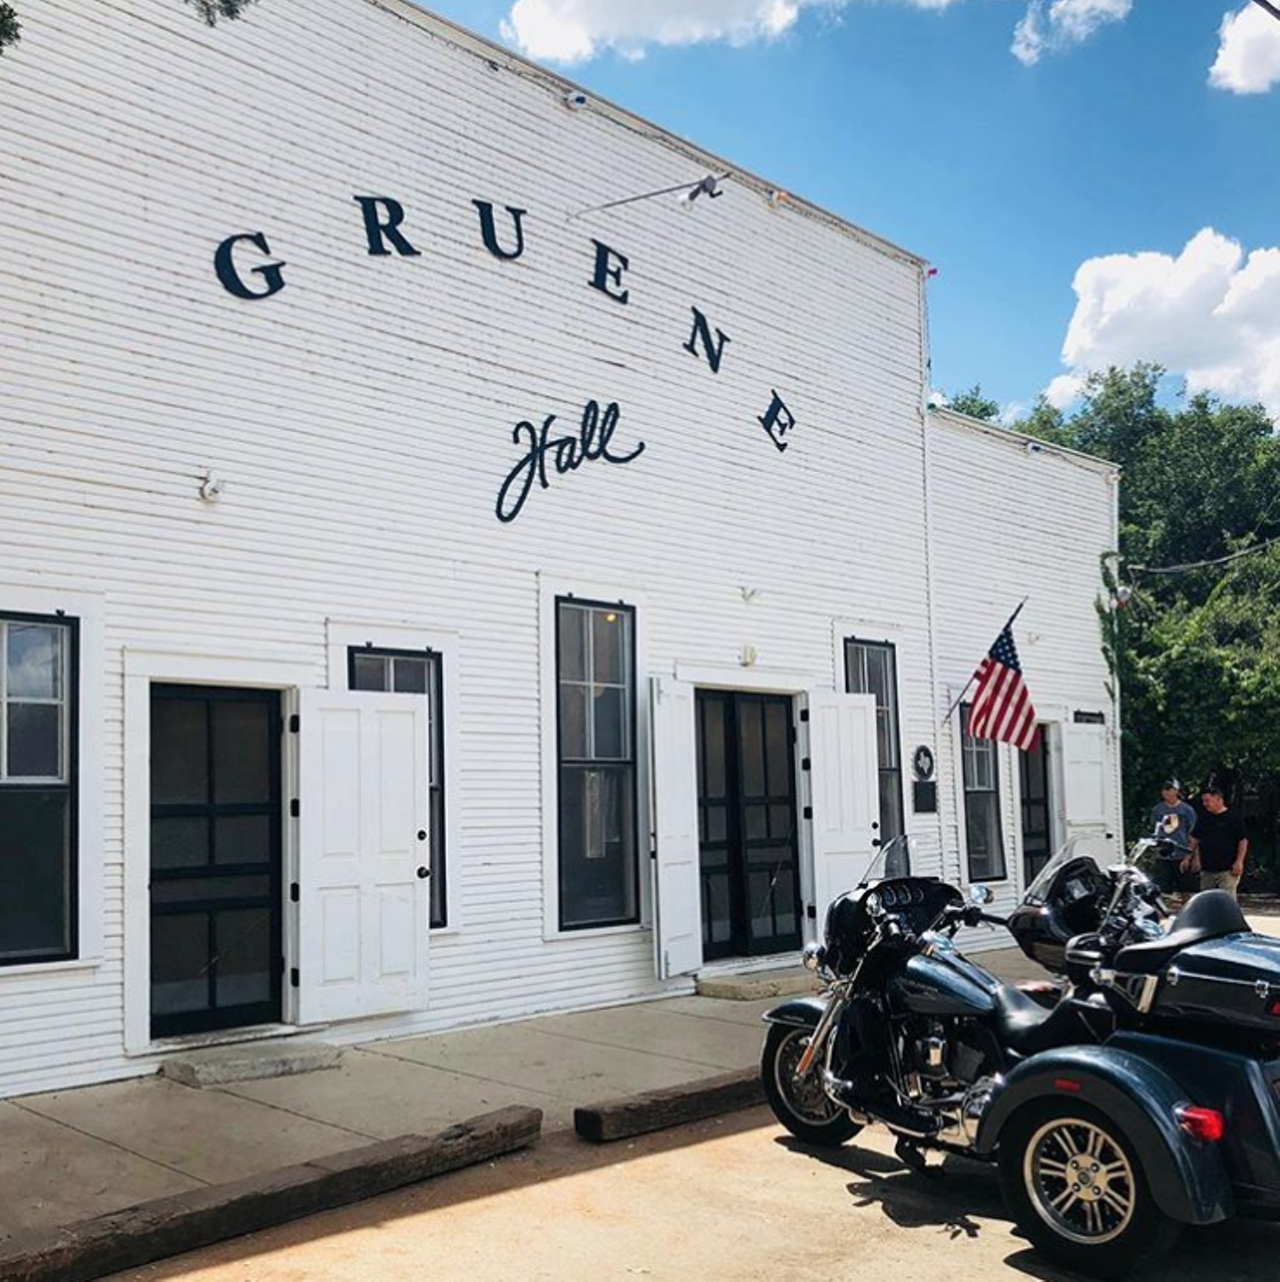 Gruene Hall
1281 Gruene Rd, New Braunfels, (830) 606-1281, gruenehall.com
If you haven’t yet visited Gruene Hall, do so now. On top of being the oldest dance hall in Texas, it’s also where Willie Nelson got his start. So grab your cowboy boots and get on over to boot scoot boogie your ass all night. Just be sure to keep the beer a’comin’.
Photo via Instagram / tabithammyers